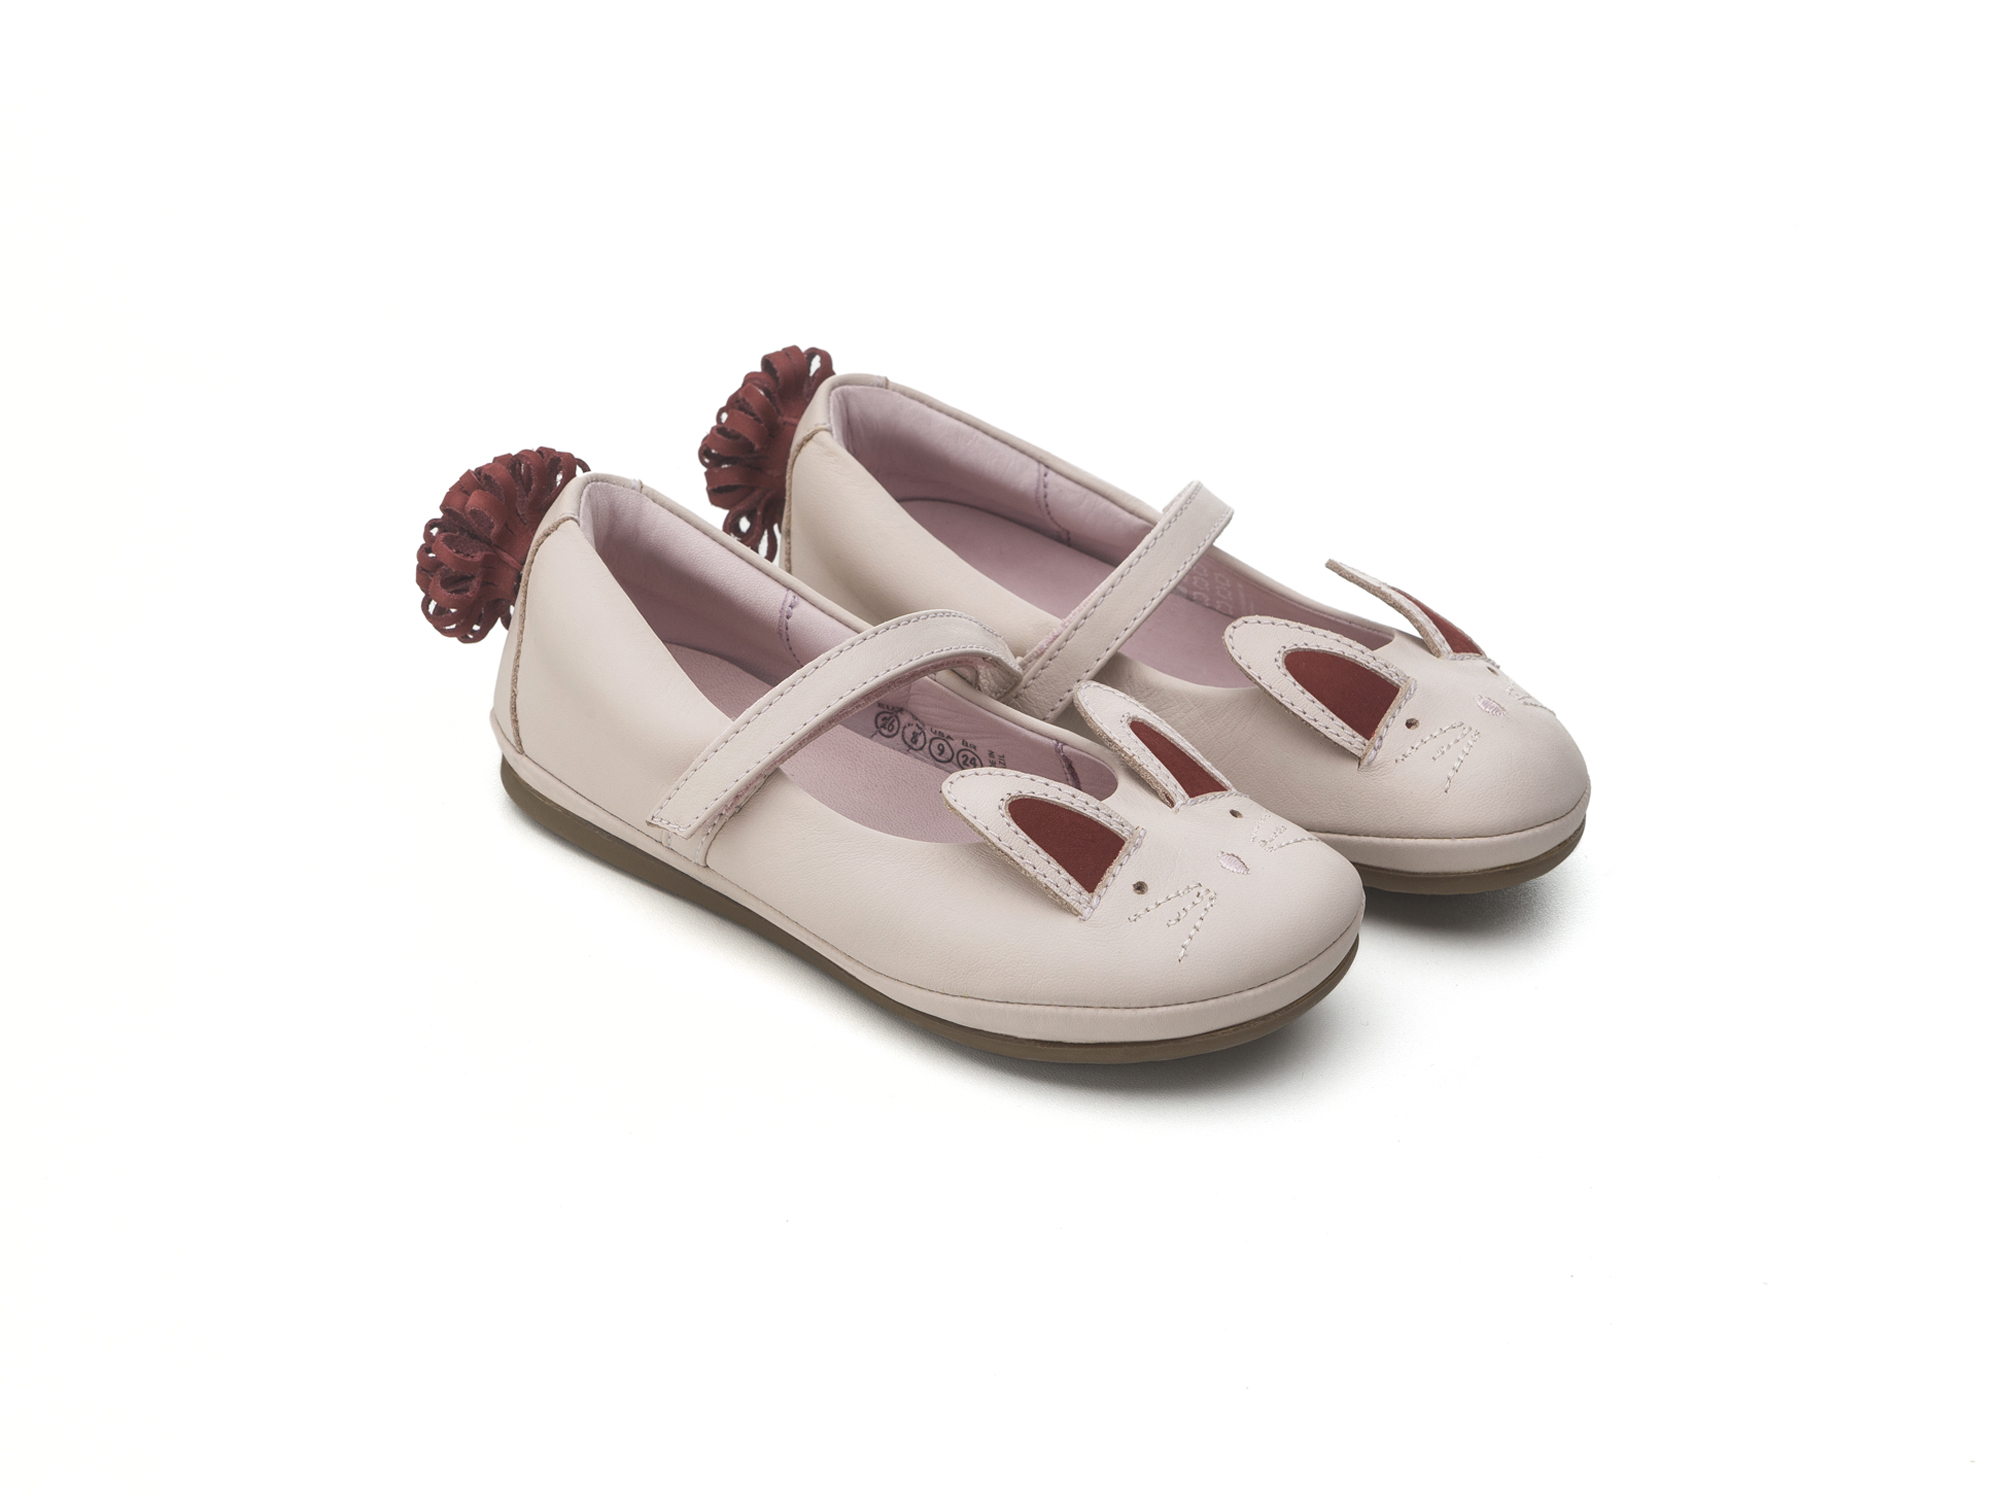 UP & GO Mary Janes for Girls Little Bunny | Tip Toey Joey - Australia - 0